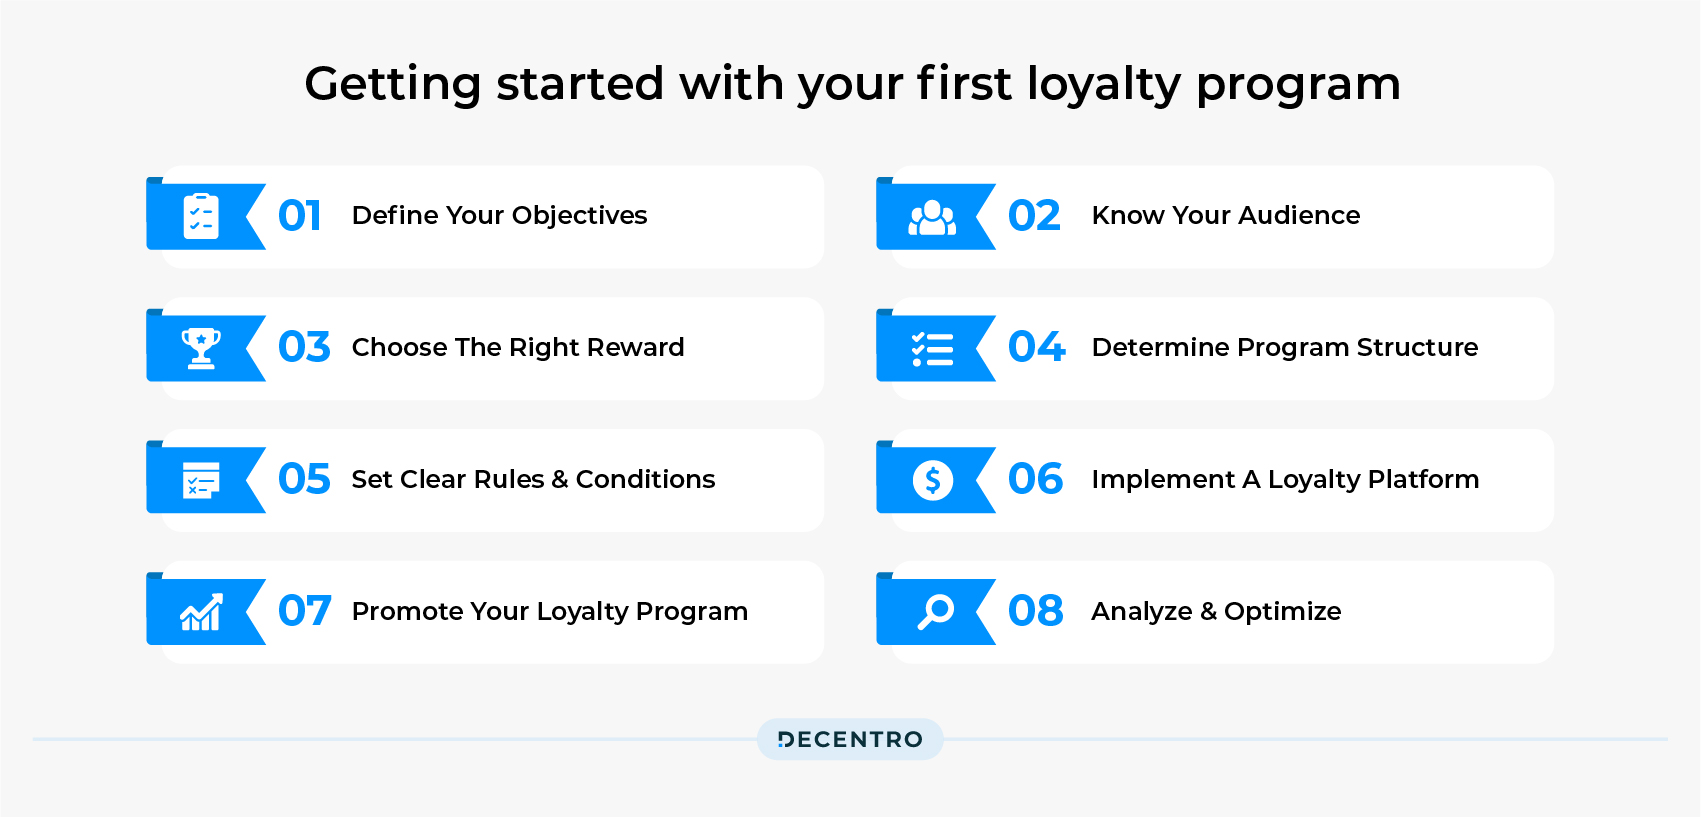 How to start your first loyalty program